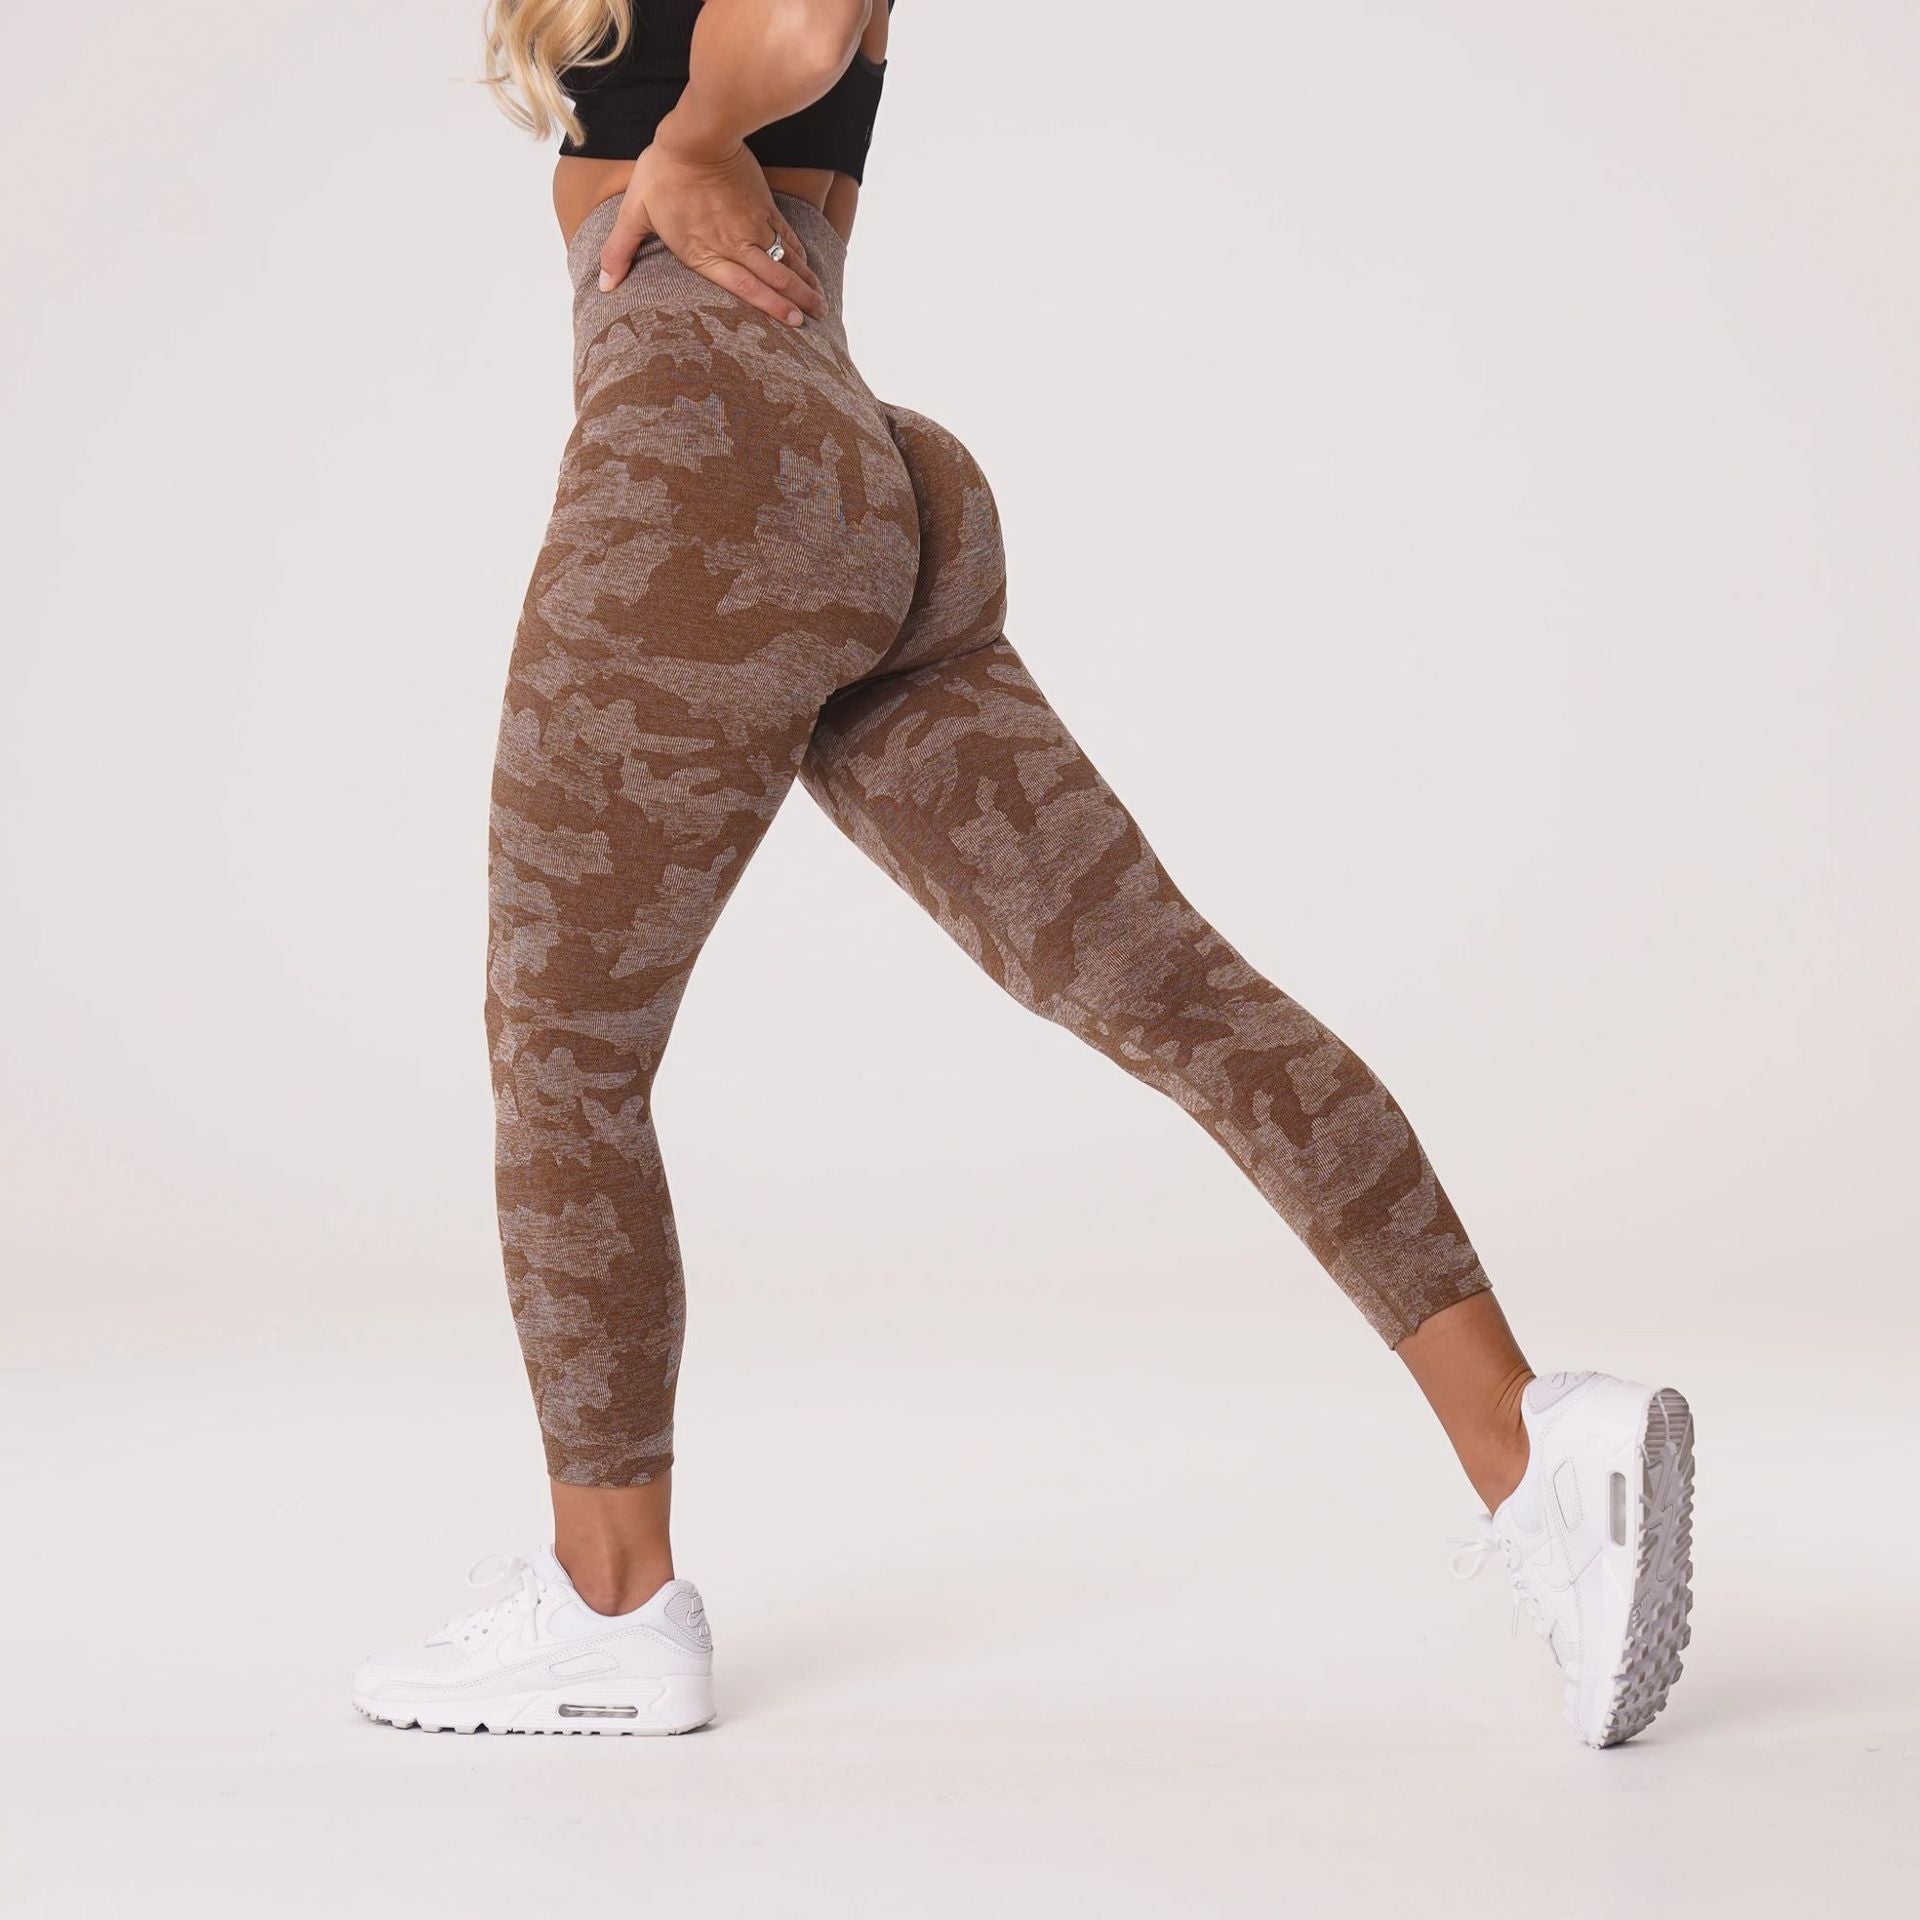 Custom High Waisted Workout Seamless Leggings High Quality Squat Proof Camo Gym Leggings For Women - Guy Christopher